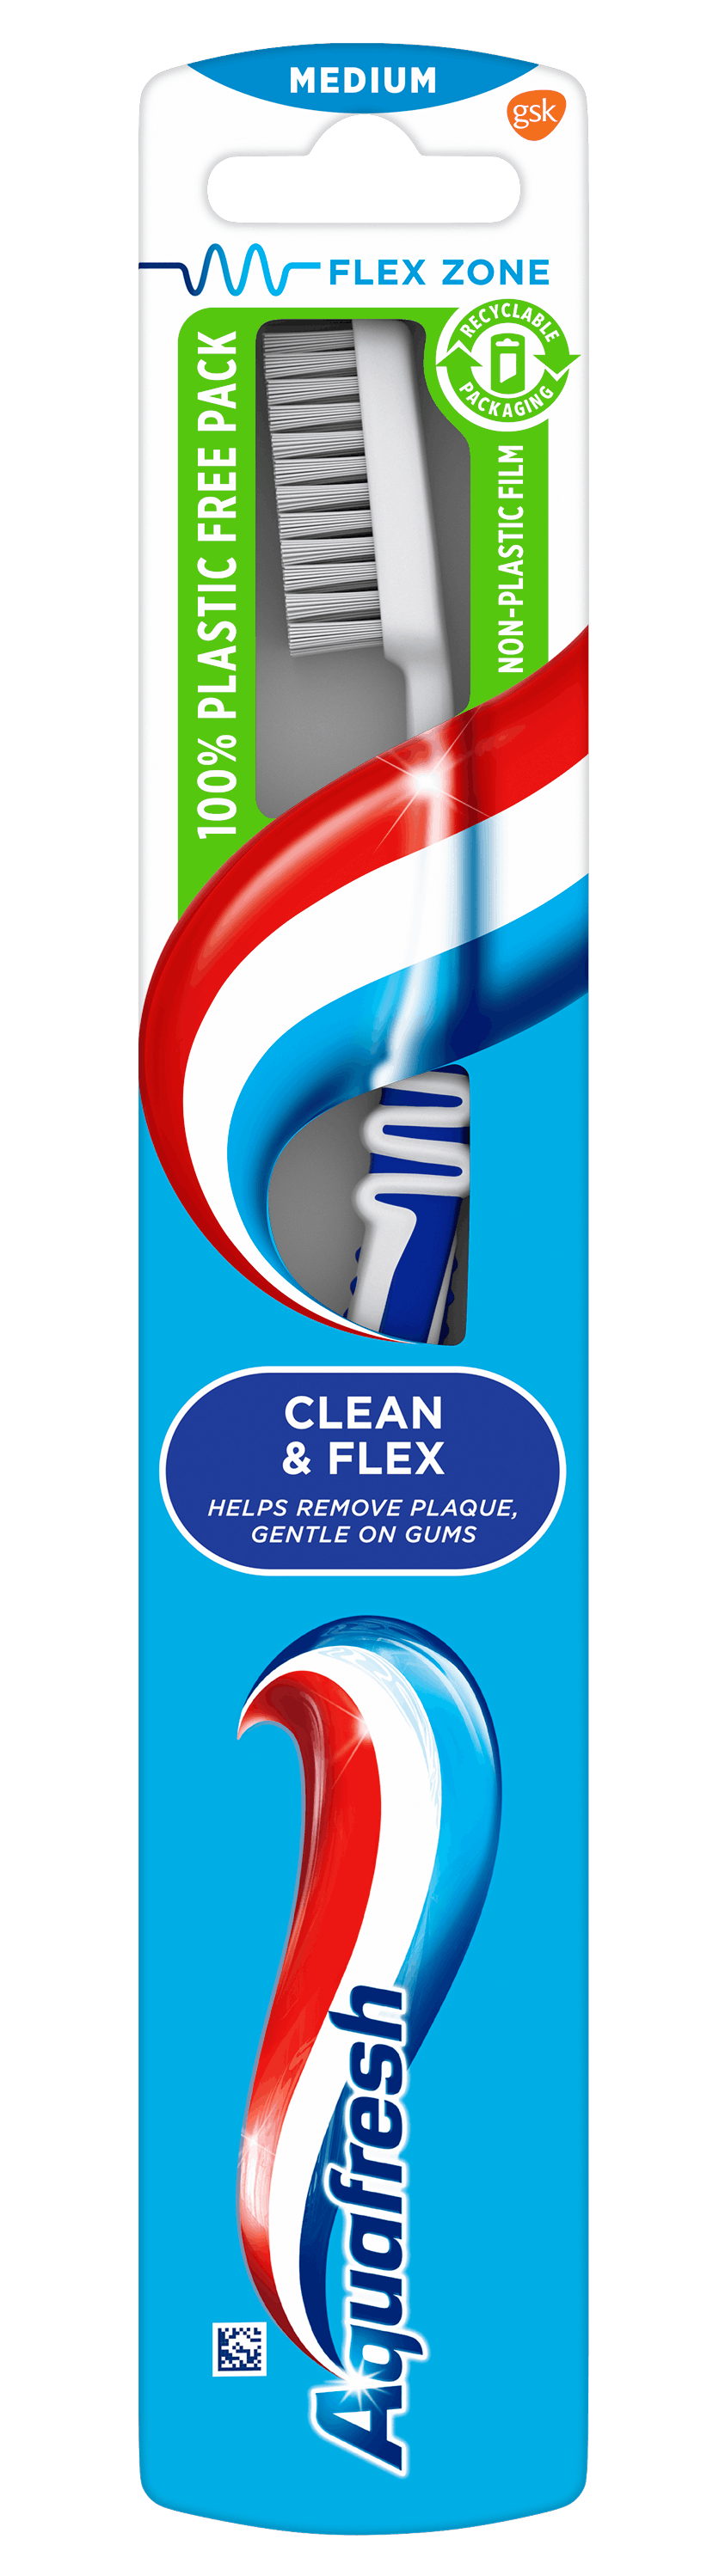 Aquafresh Clean & Flex medium toothbrush in pink/white colour combination with Aquafresh colors on the packaging.